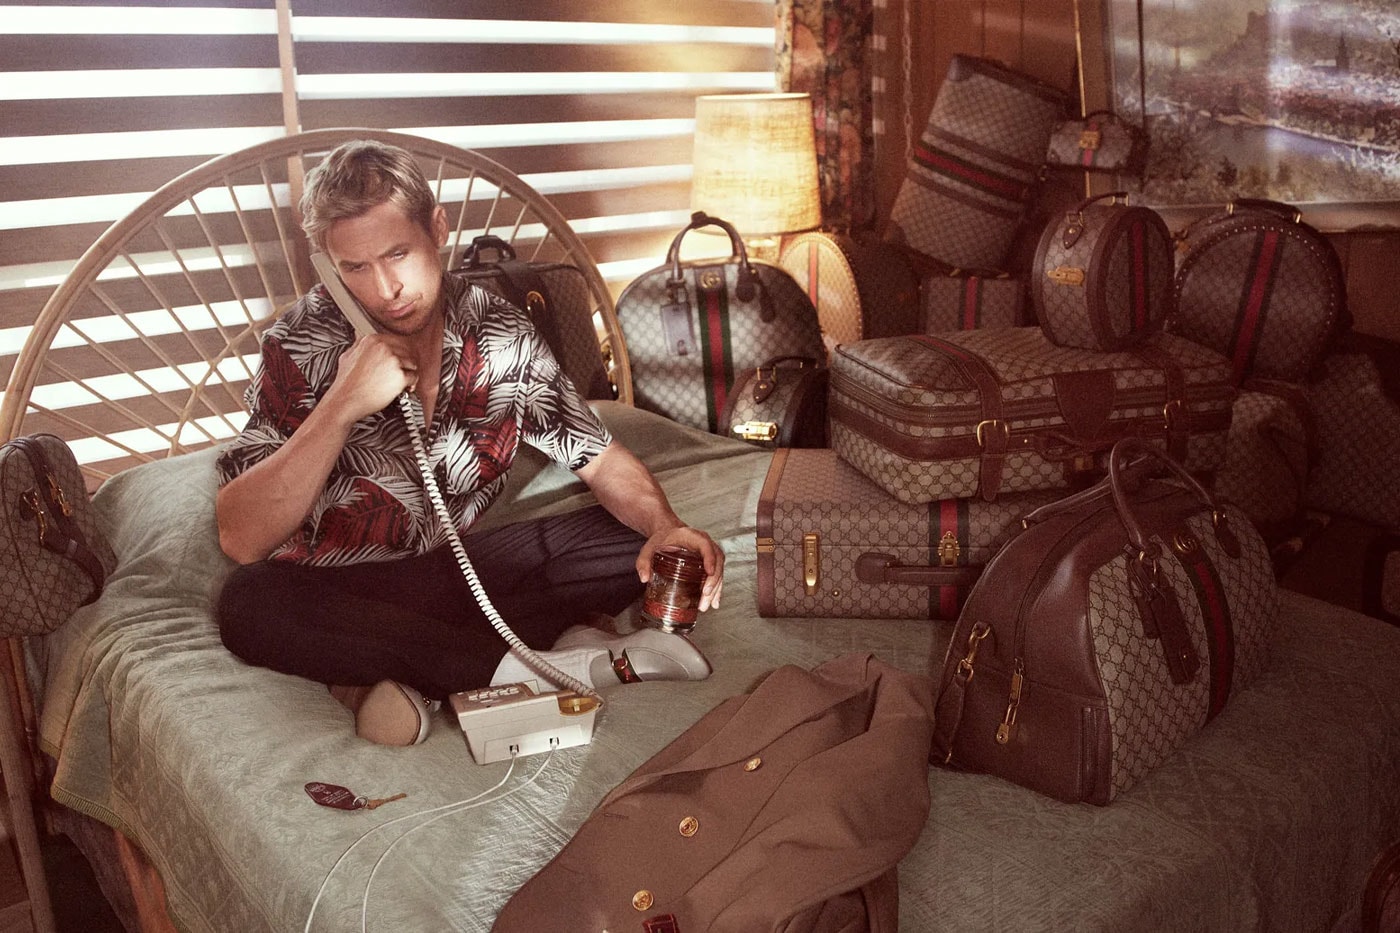 Ryan Gosling Is Gucci's Latest Muse Luggage Campaign | Hypebeast